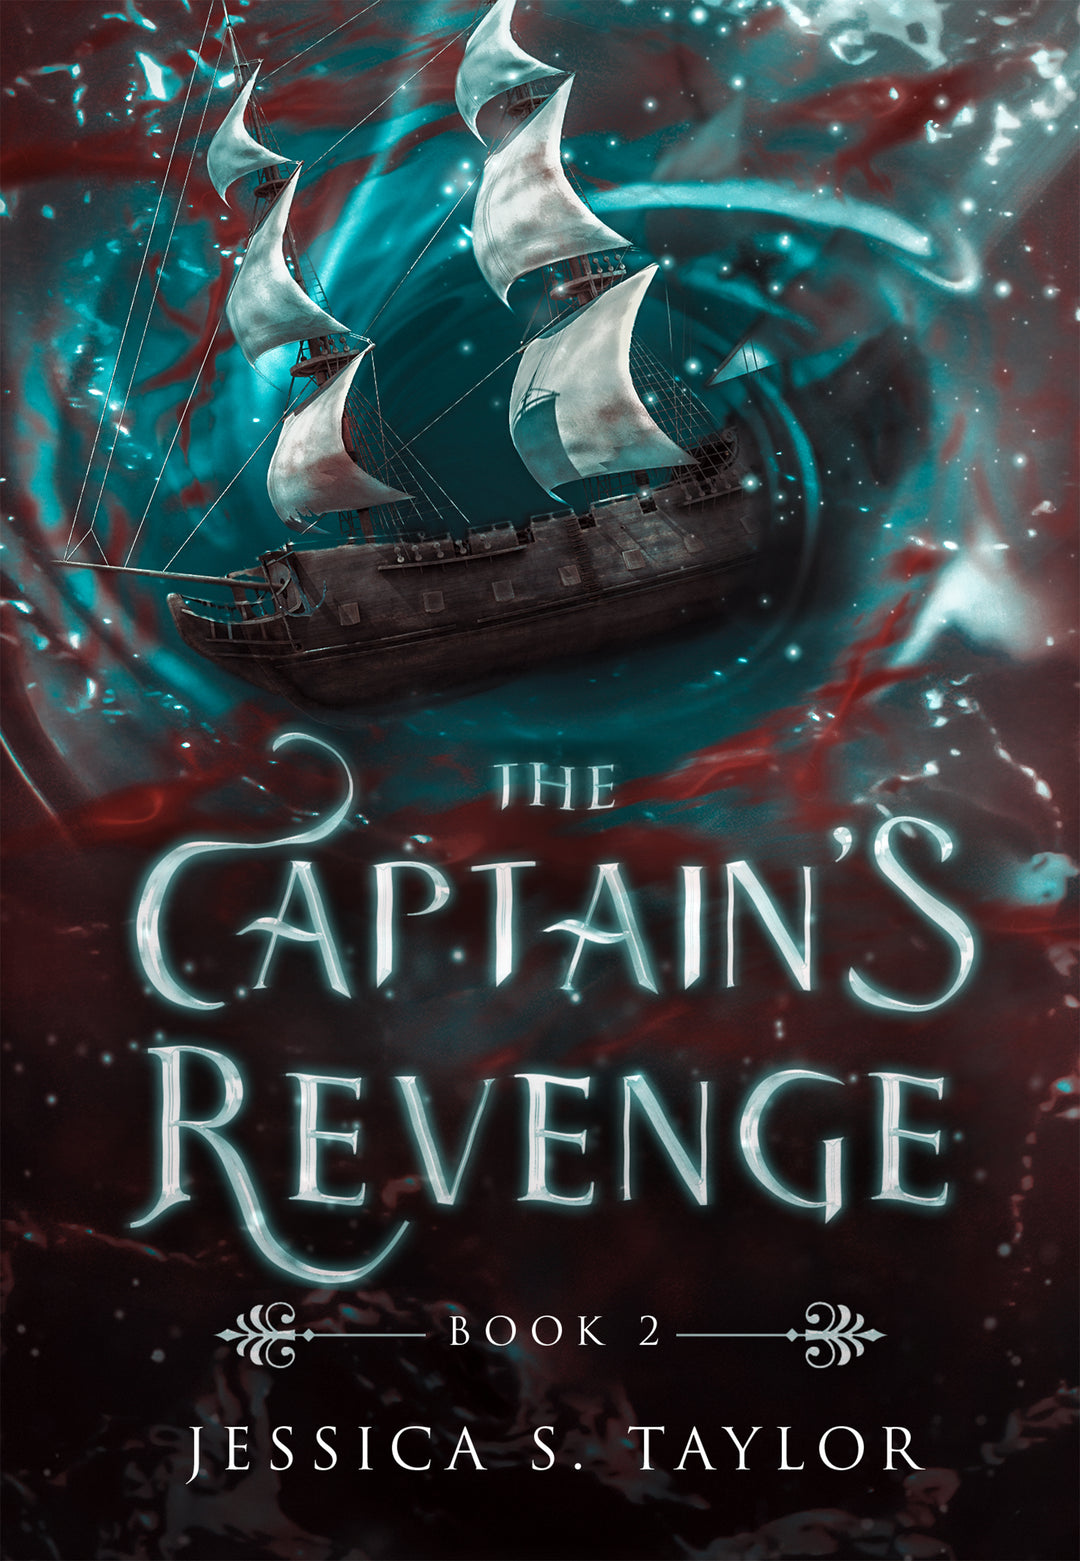 Book cover for The Captain's Revenge by Jessica S. Taylor, showing a pirate ship in an ocean that is slowly being filled with blood in the water.